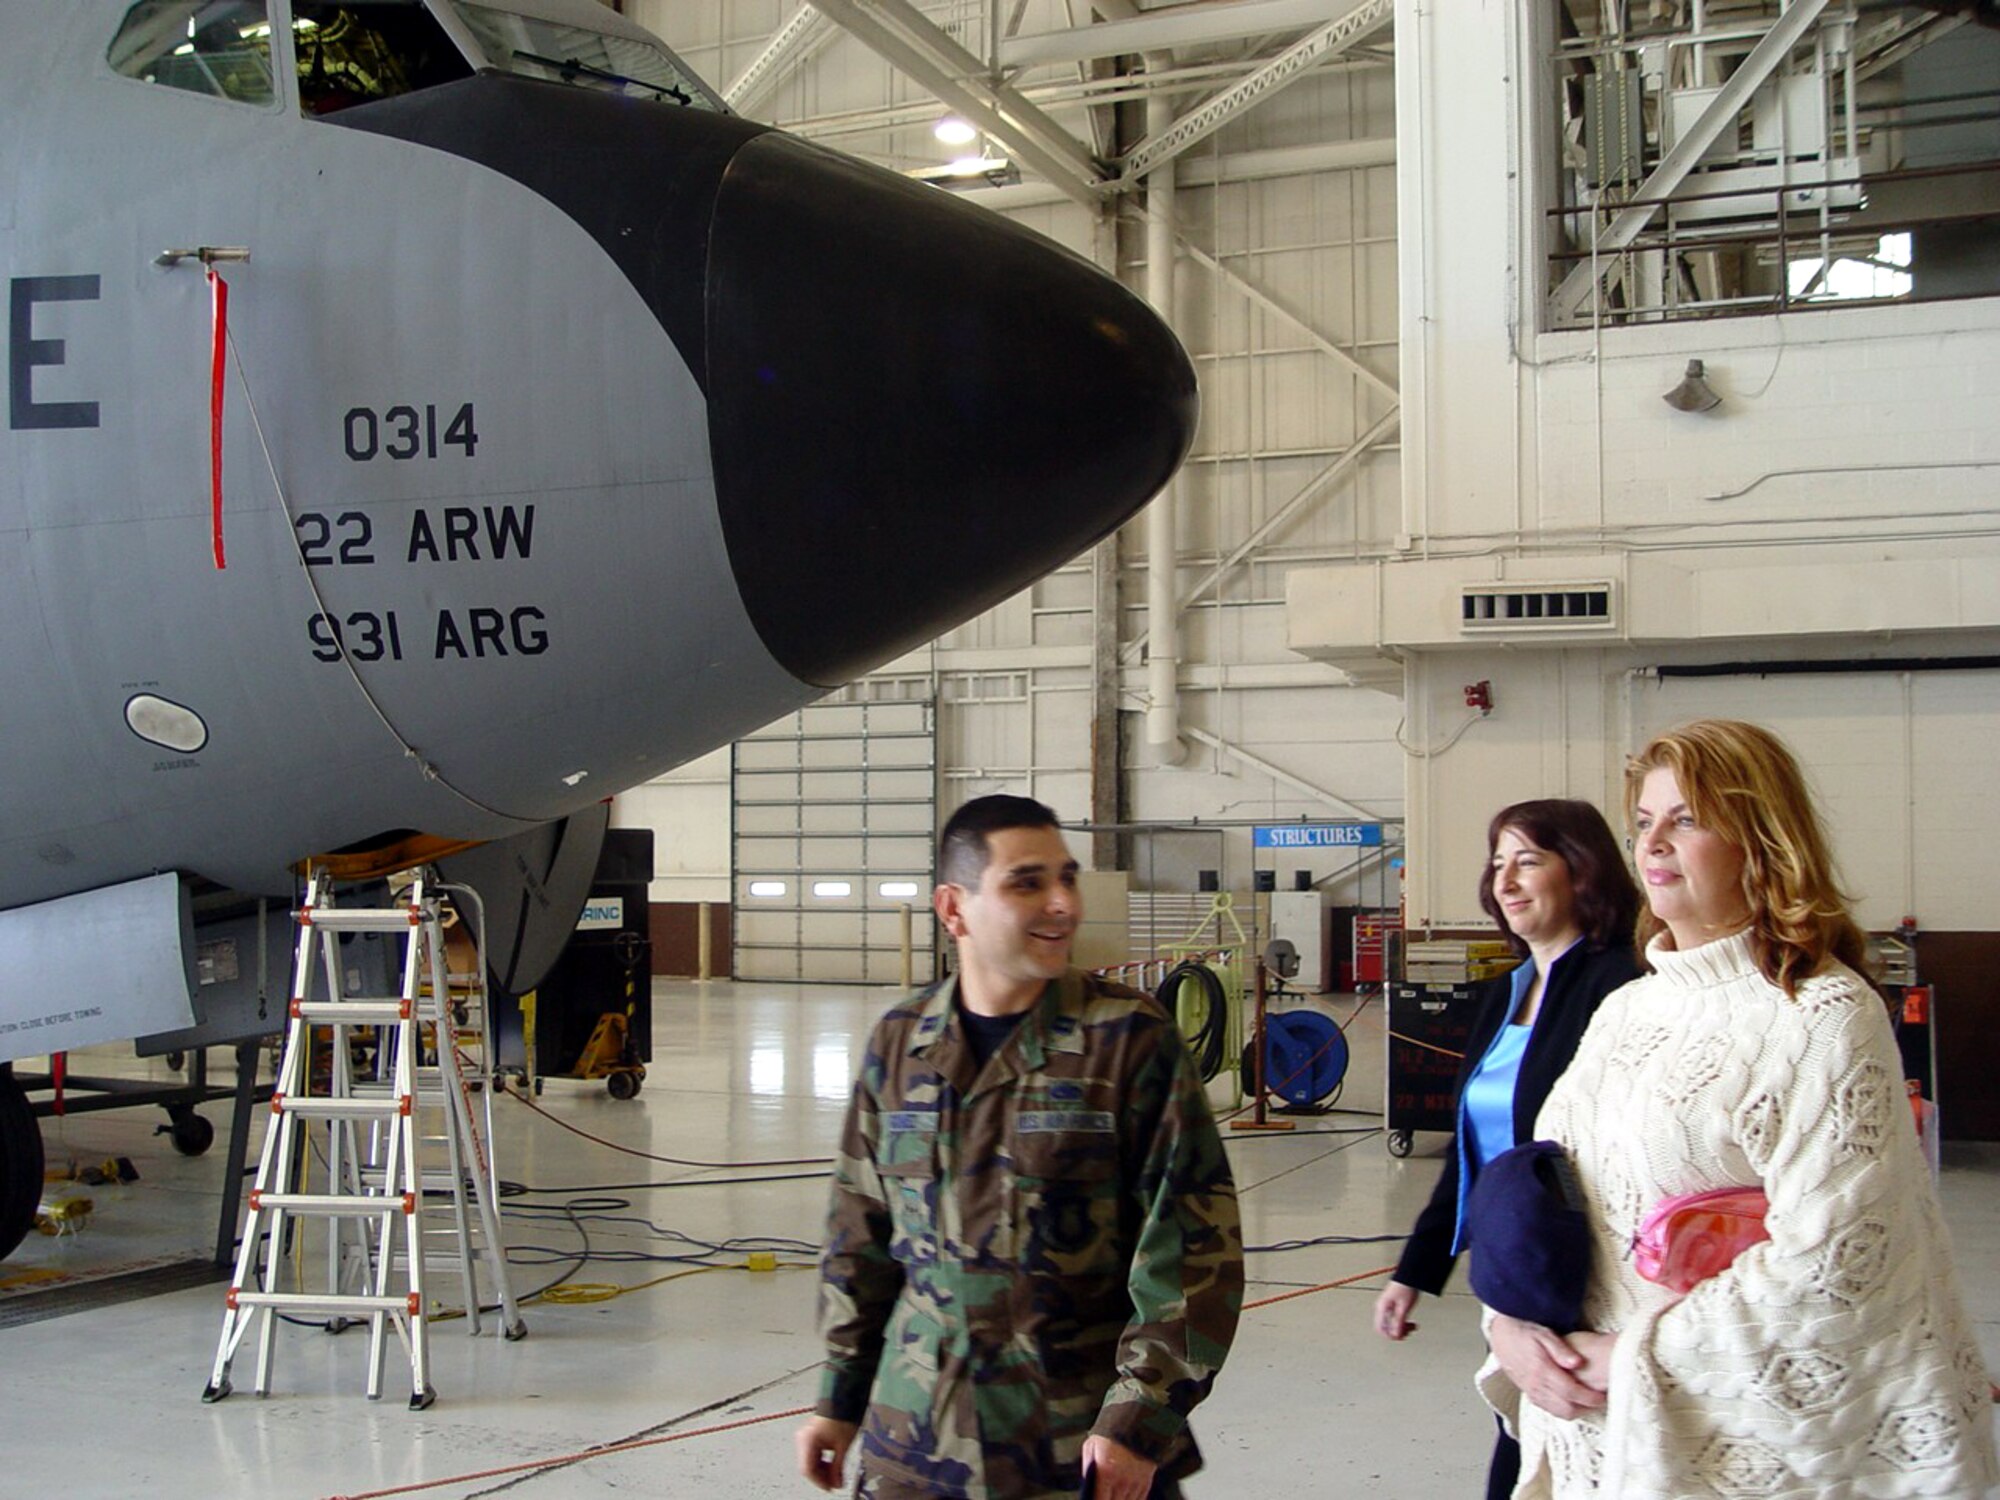 MCCONNELL AIR FORCE BASE, Kan. -- Capt. Robert Gomez gives Golden Globe-winning actress Kirstie Alley a tour of the KC-135 Stratotanker maintenance hangar.  Ms. Alley visited here March 8 to show her support for the troops.  Captain Gomez is assigned to the 22nd Maintenance Squadron here.  (U.S. Air Force photo by Airman 1st Class Harold Barnes III)